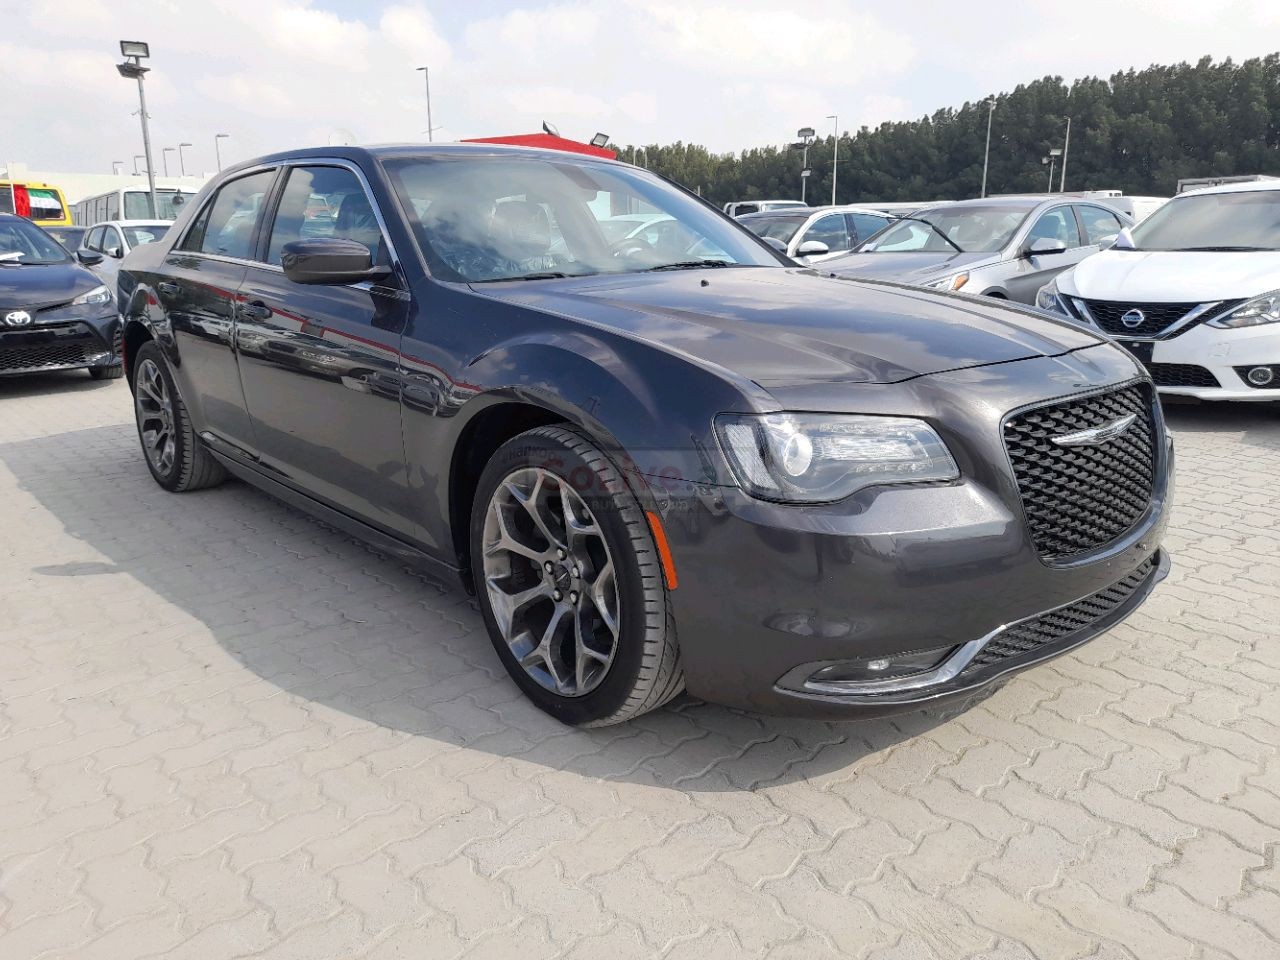 Chrysler AWD 300 S 2016 AED 38,000, US Spec